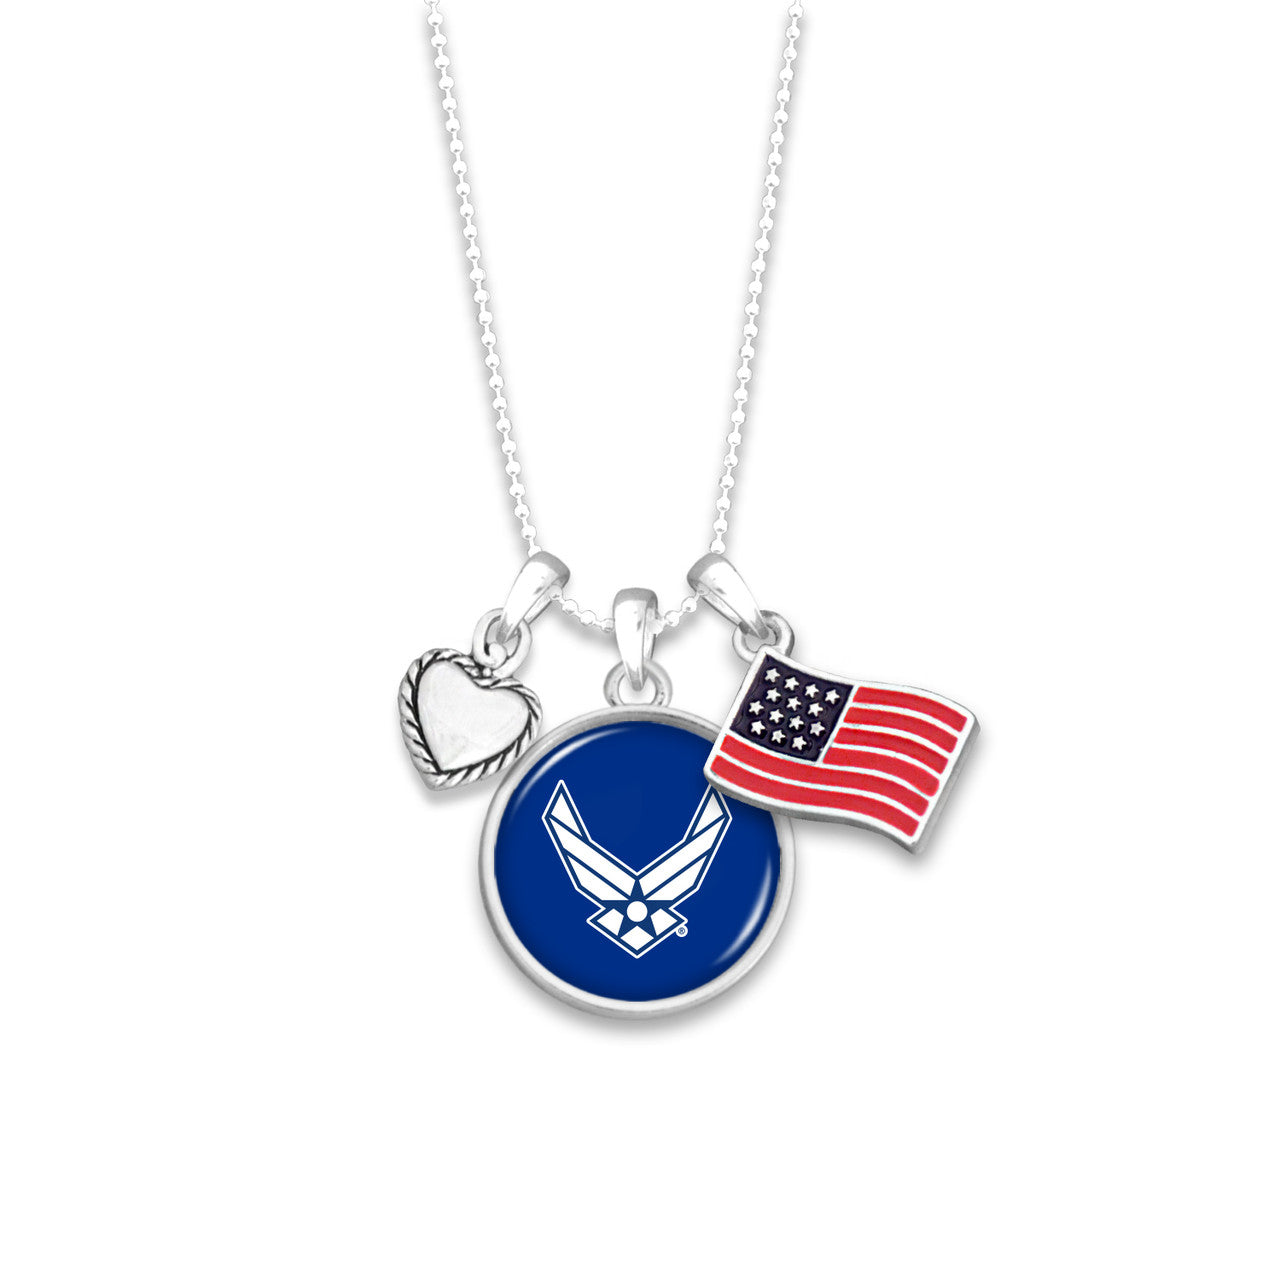 U.S. Air Force Wings Triple Charm Flag Accent Necklace